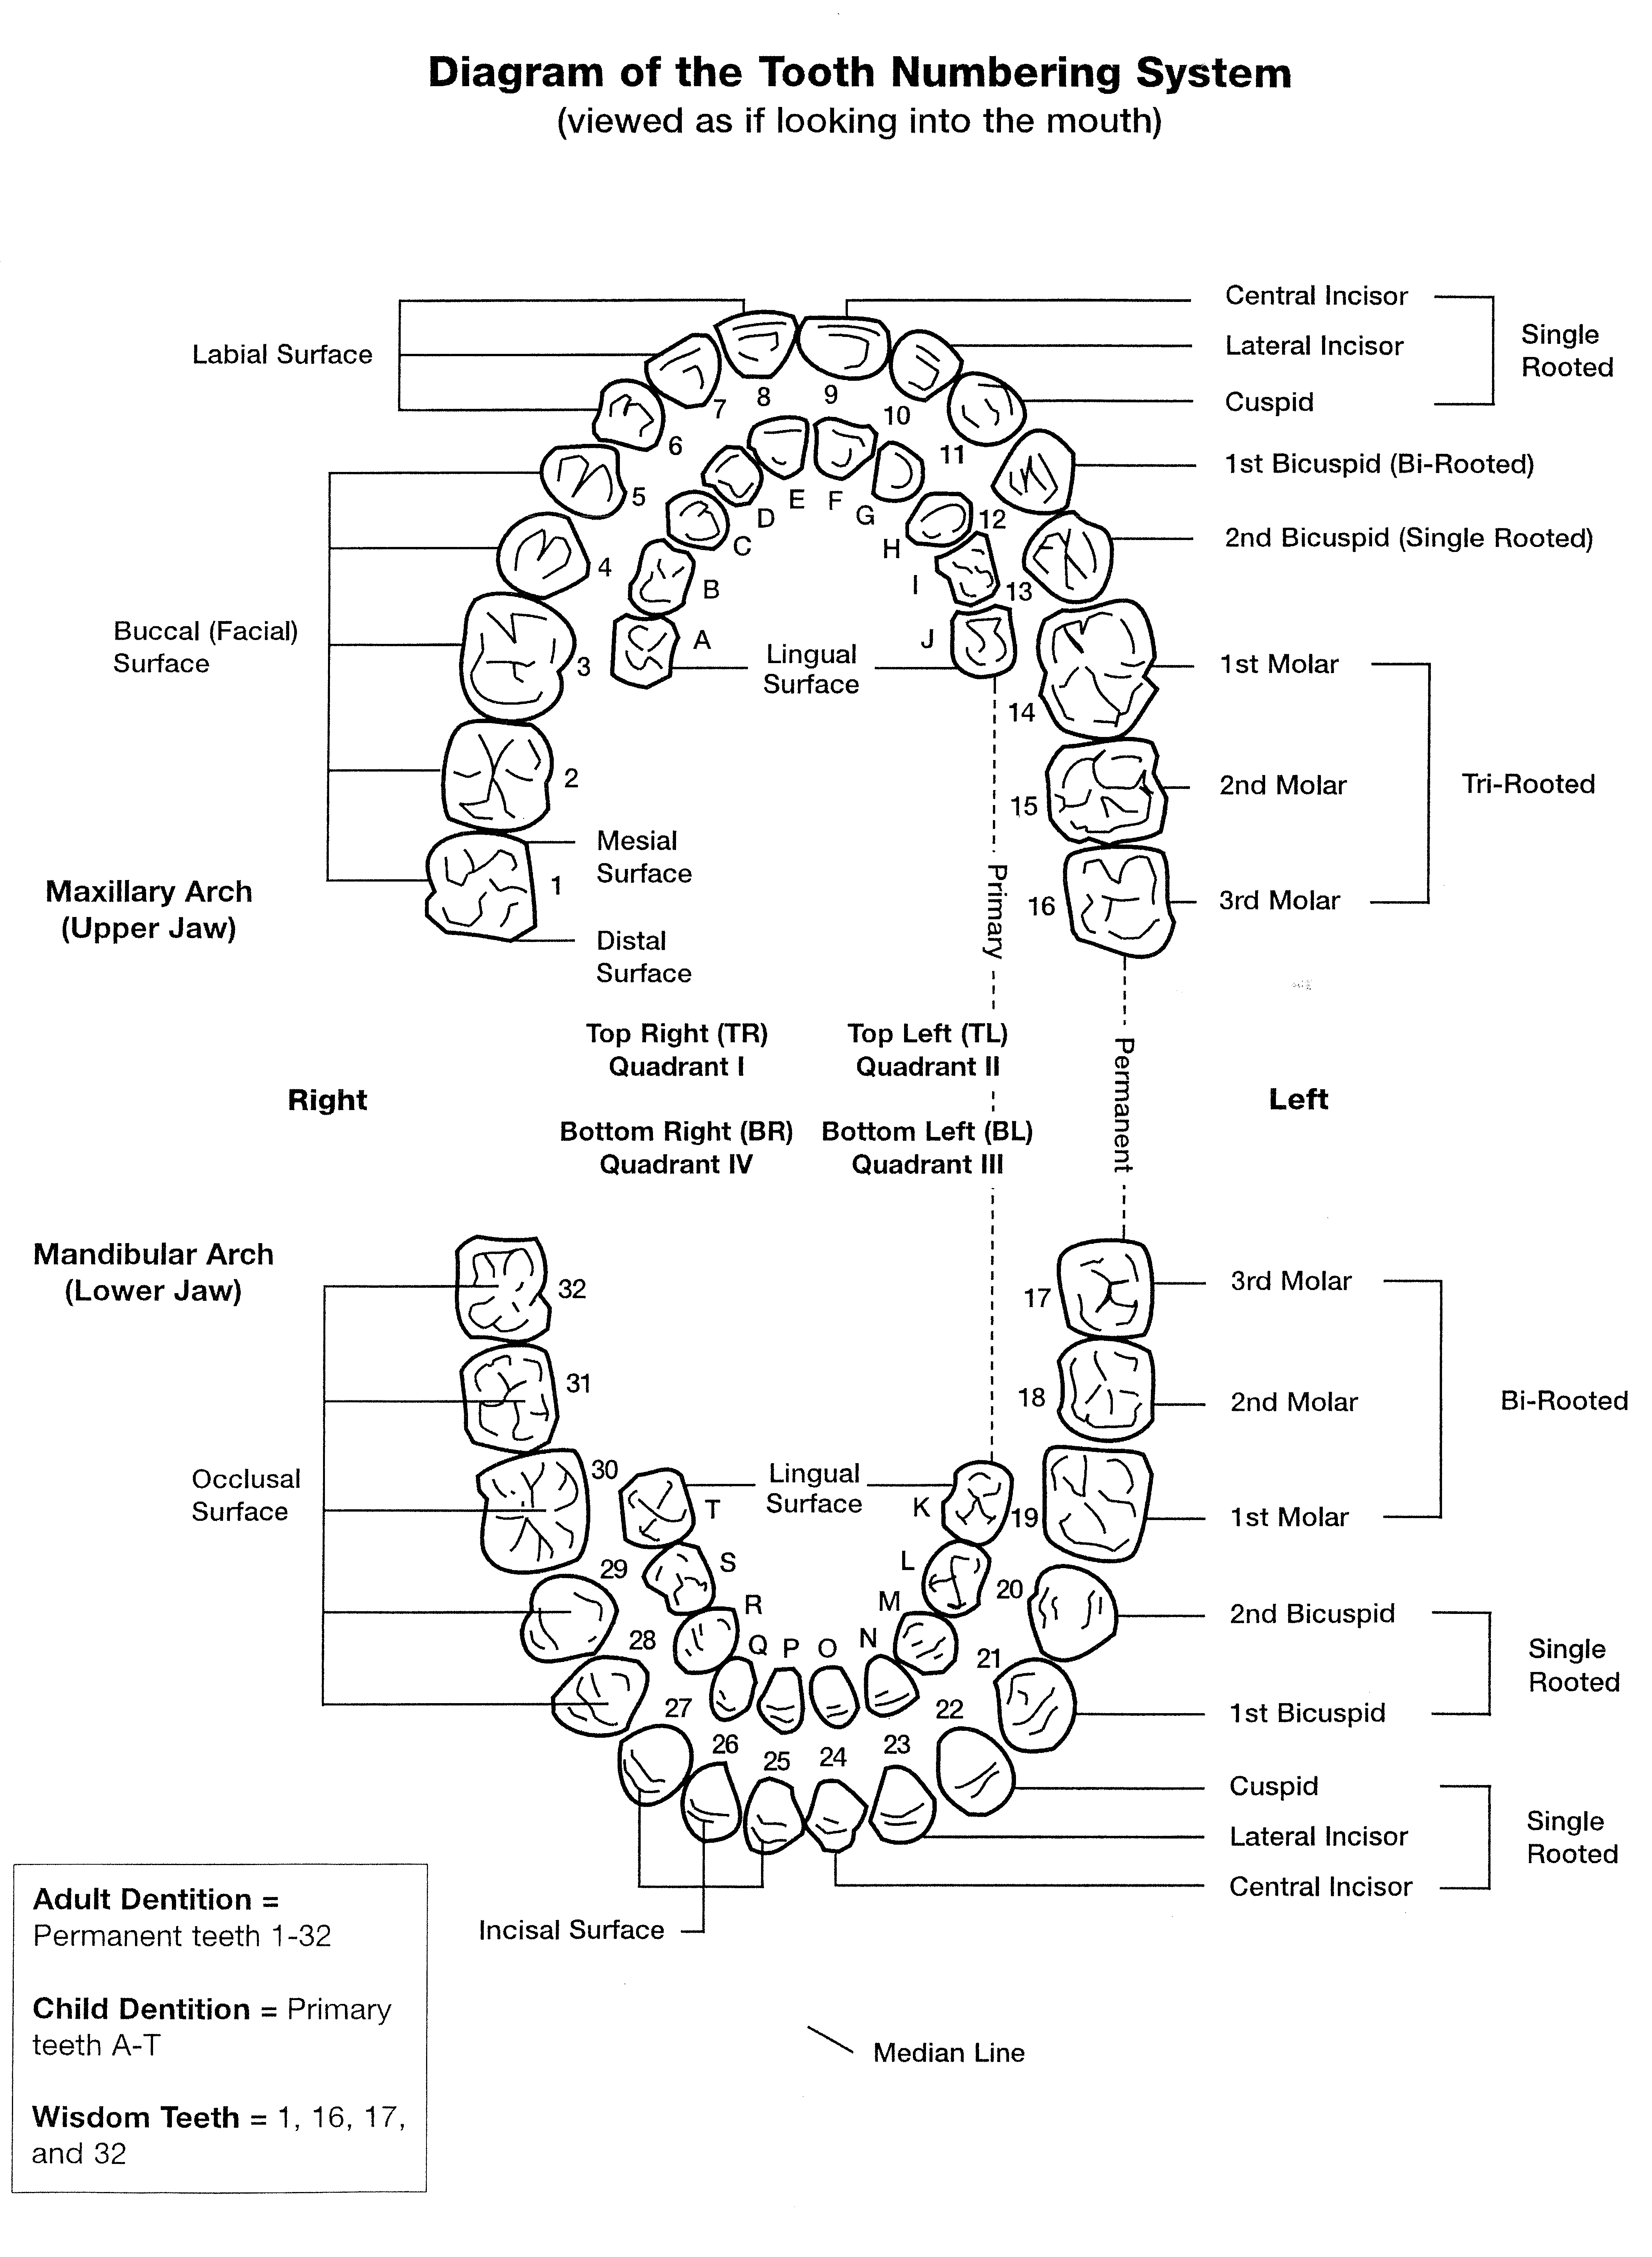 Diagram of tooth numbering system viewed as if looking into the mouth.